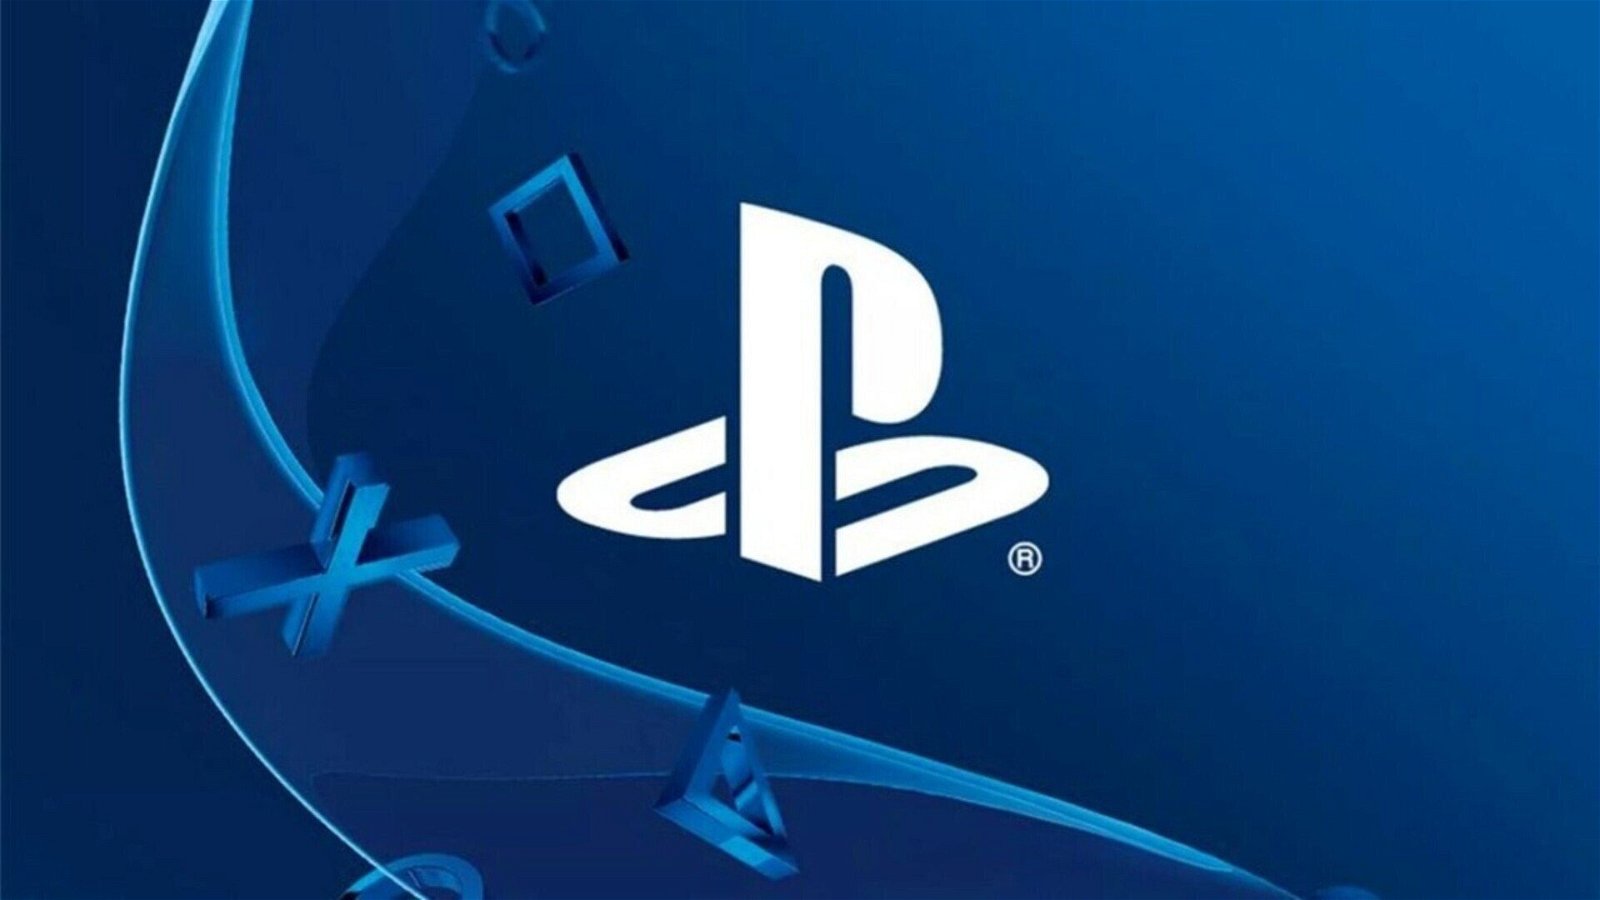 PlayStation Network is offline, but only on some consoles